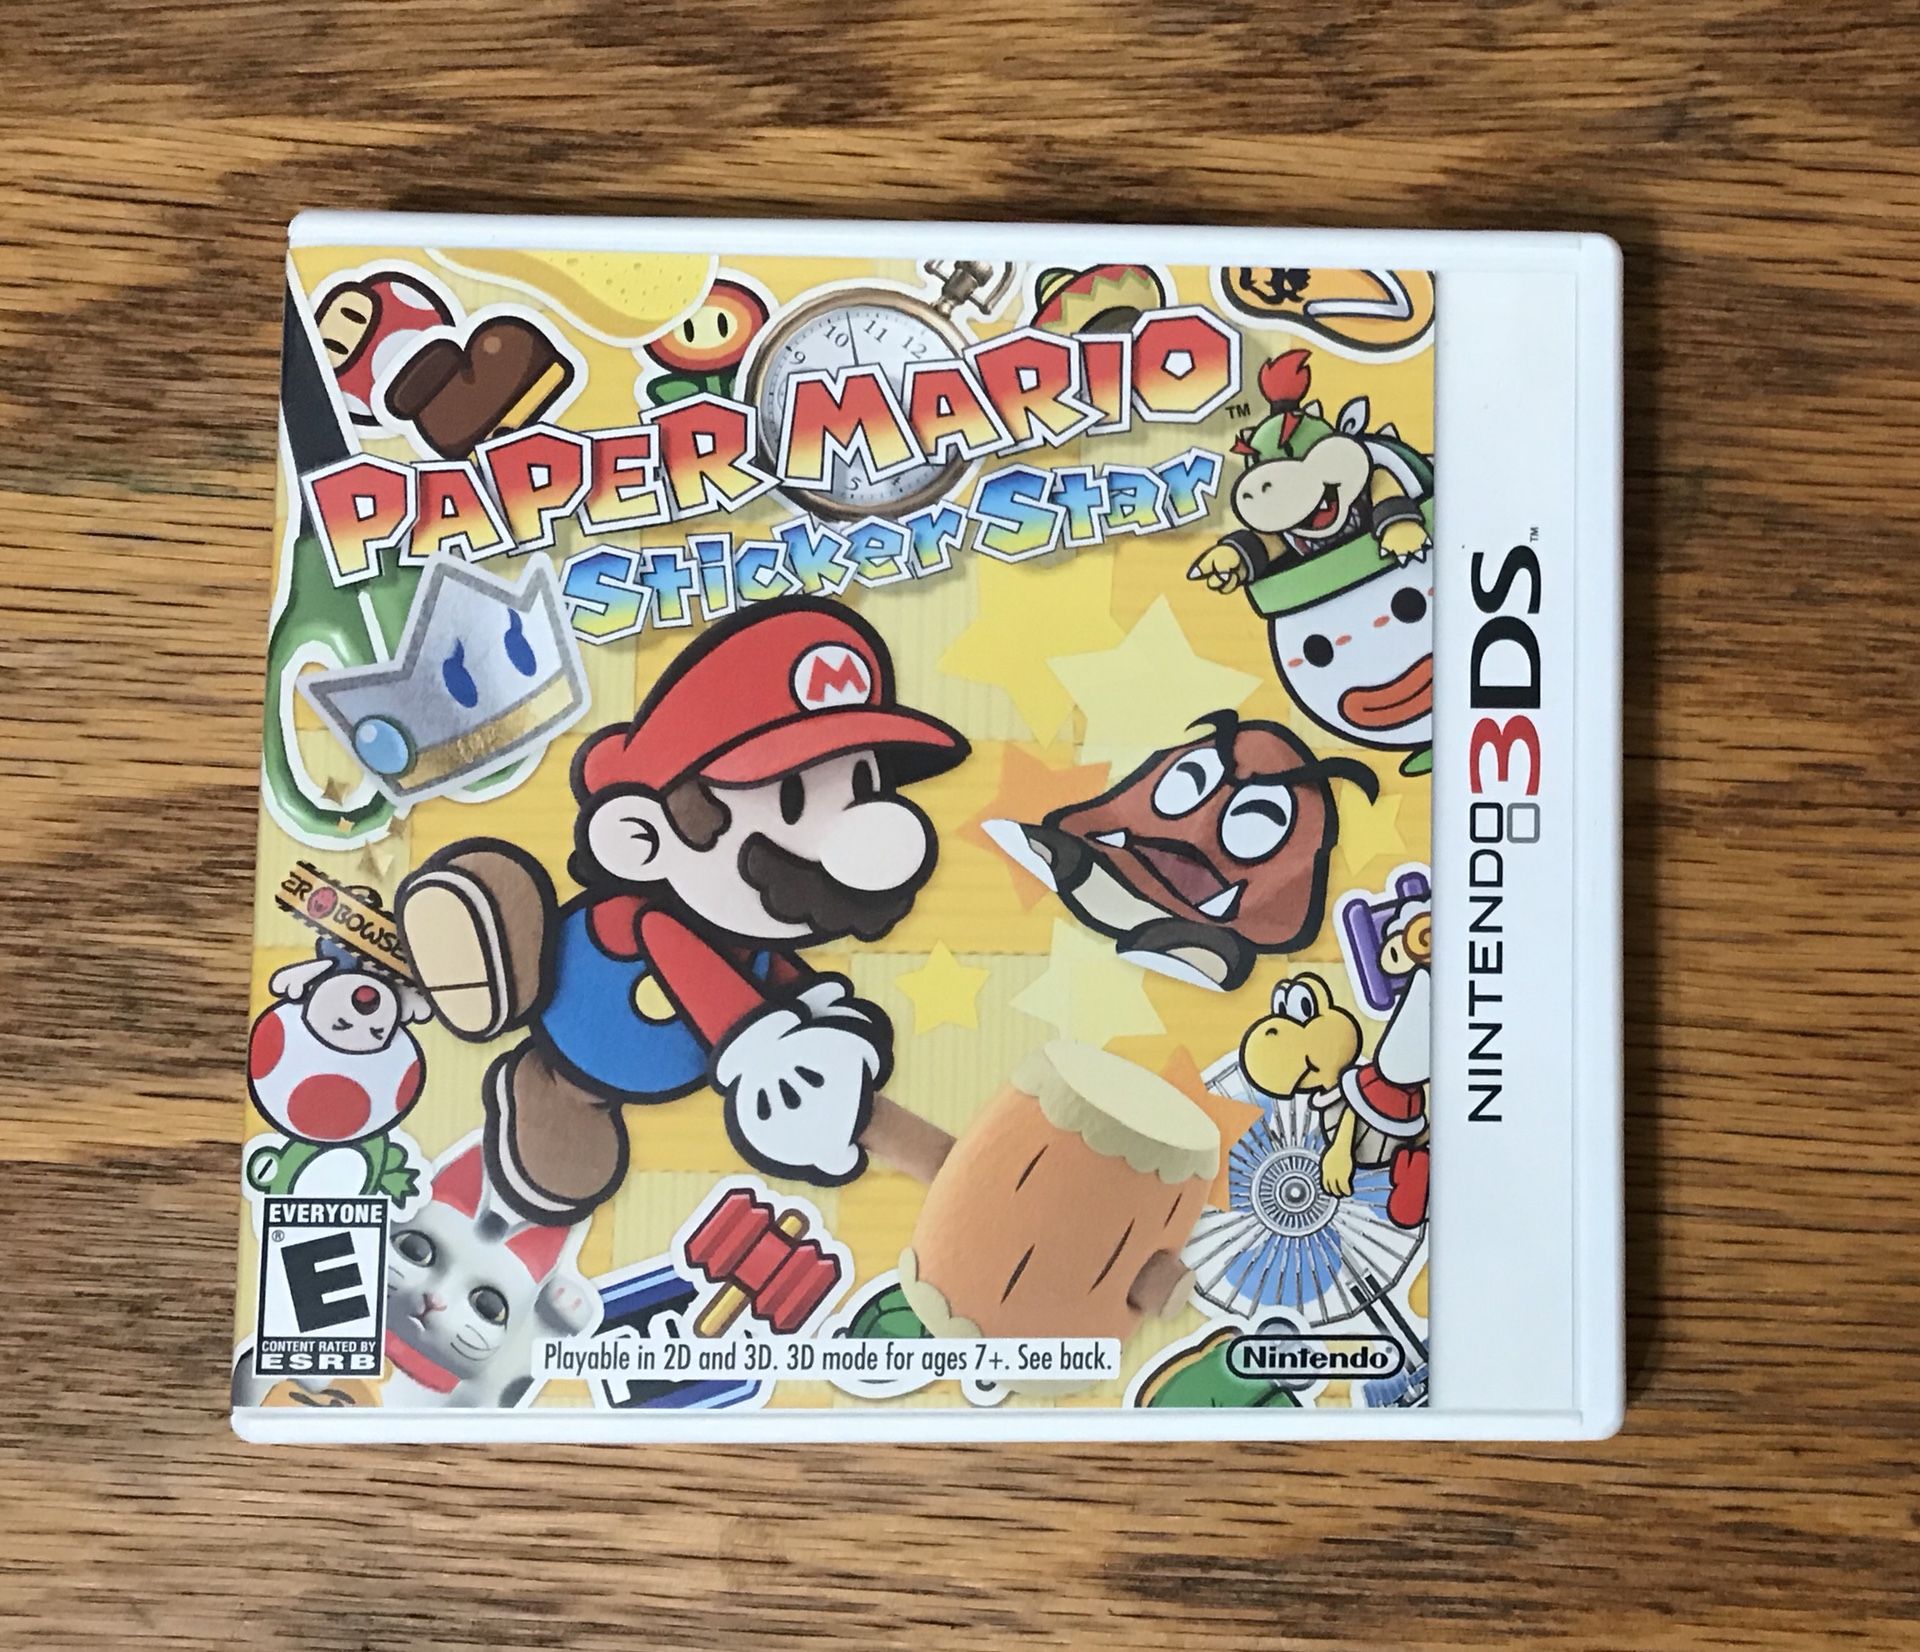 Paper Mario Sticker Star COMPLETE for Nintendo 3DS video game system new 2ds xl Bros brothers